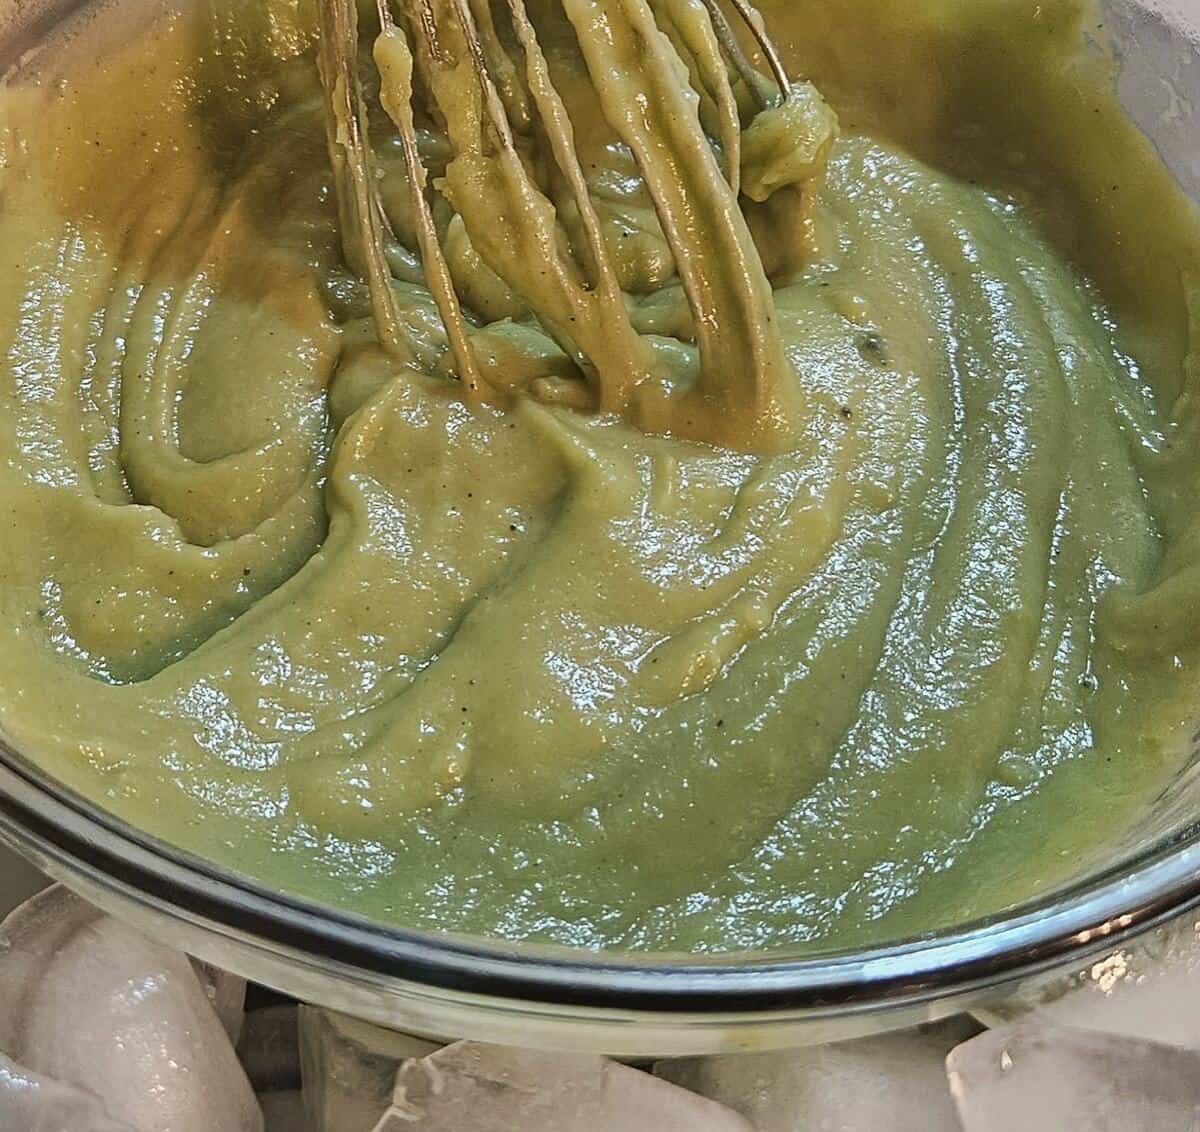 the finished matcha cream puff filling as it chills on an ice bath in a bowl while being stirred with a wire whip